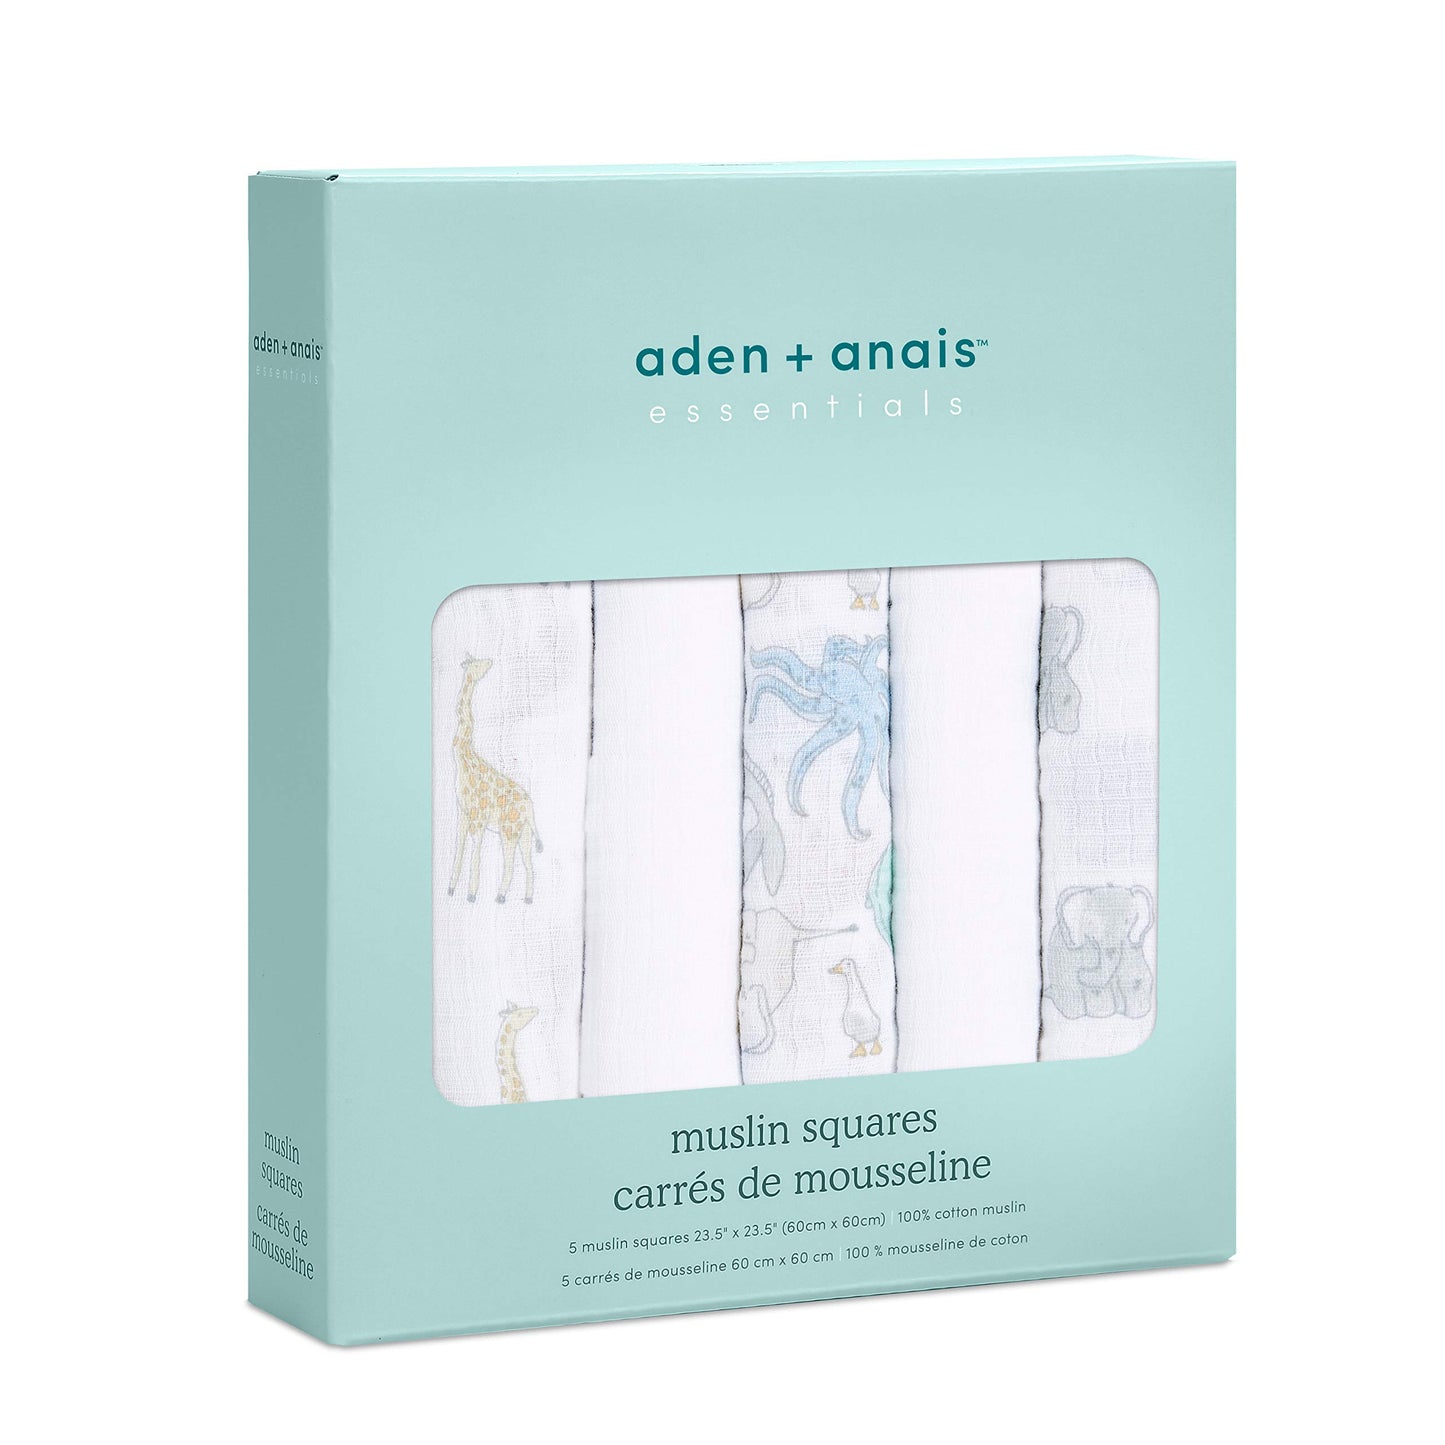 aden + anais essentials 100% Cotton Muslin Musy Squares, Multi-use Baby Cloths for Girls & Boys, 60x60cm, Ideal Newborn & Infant Nursing Set, Perfect Shower Gifts, 5 Pack, natural history